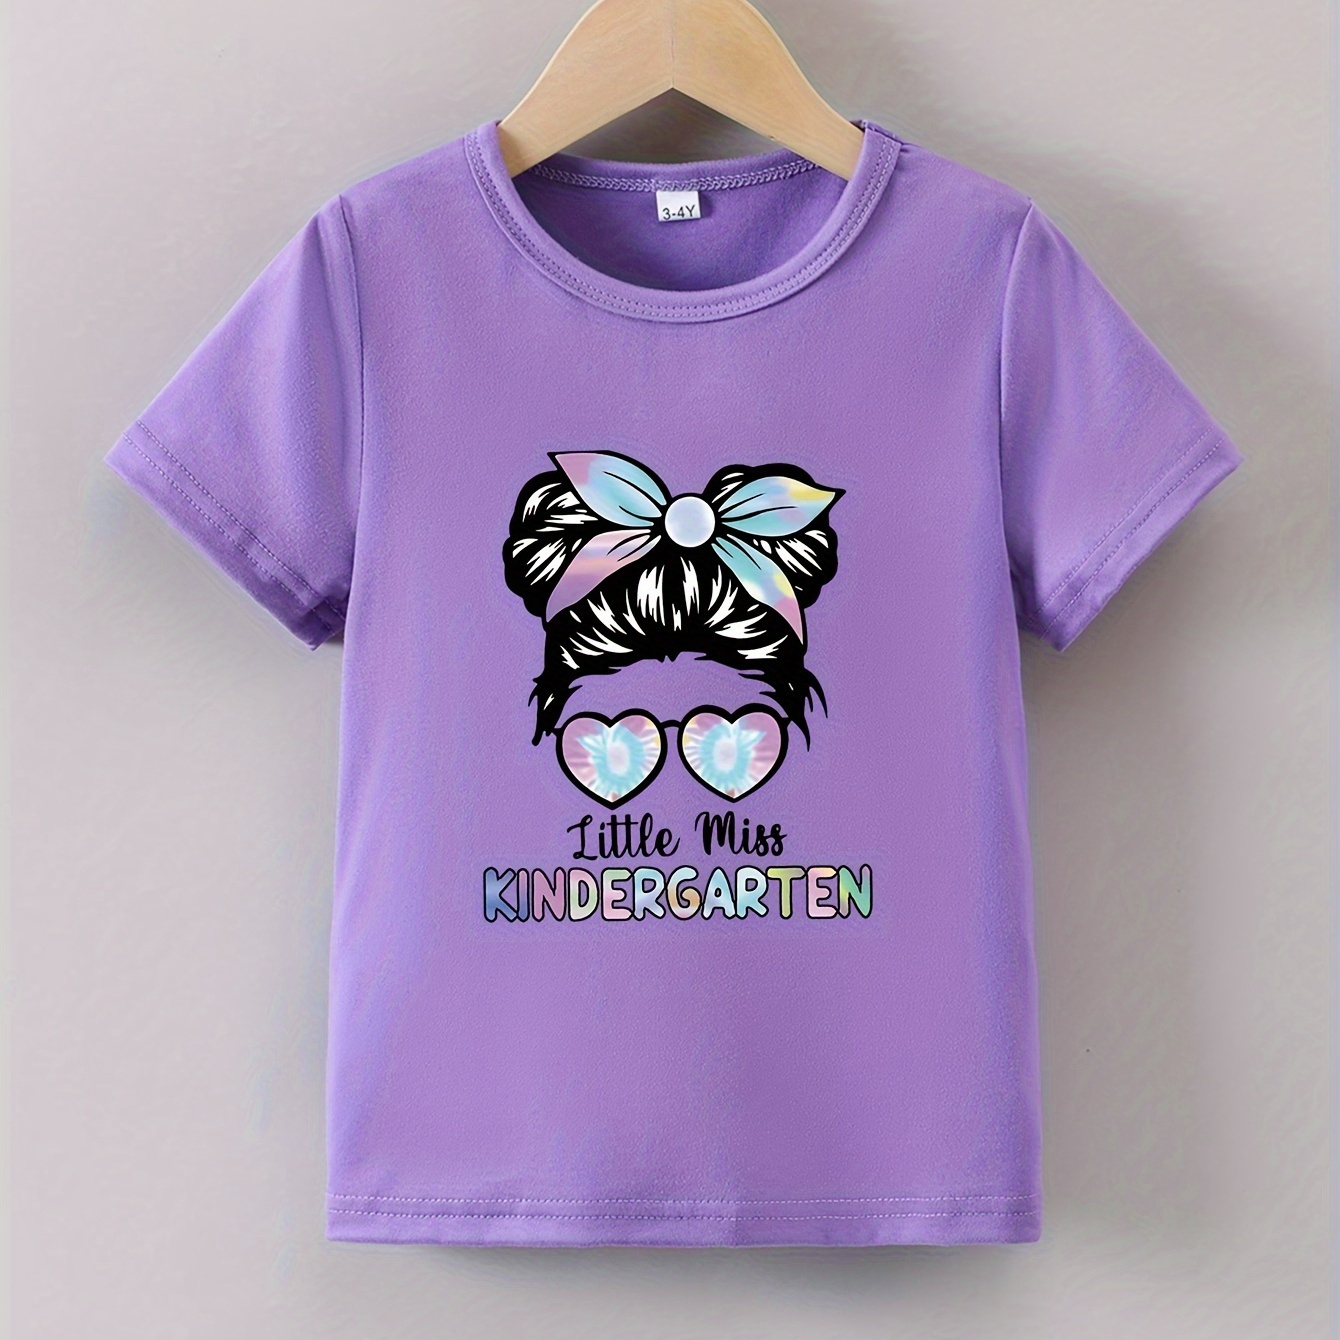 

Little Miss Kindergarten & Cartoon Girl With Sunglasses Graphic Print, Girls' Casual Comfy Crew Neck Short Sleeve Tee For Spring And Summer, Girls' Clothes For Outdoor Activities